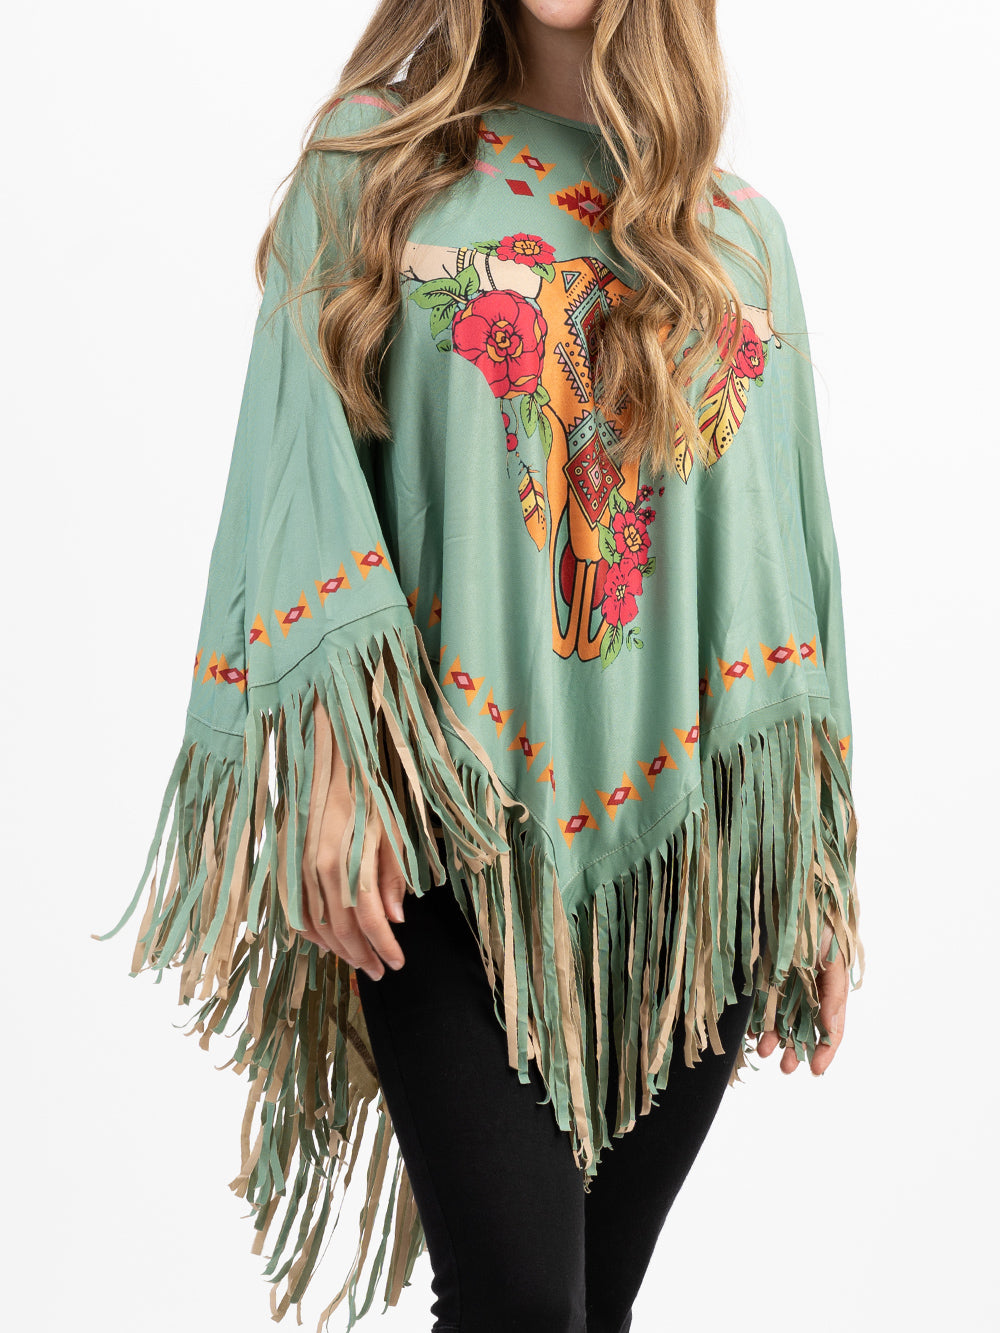 Montana West Steer Skull Collection Poncho - Cowgirl Wear